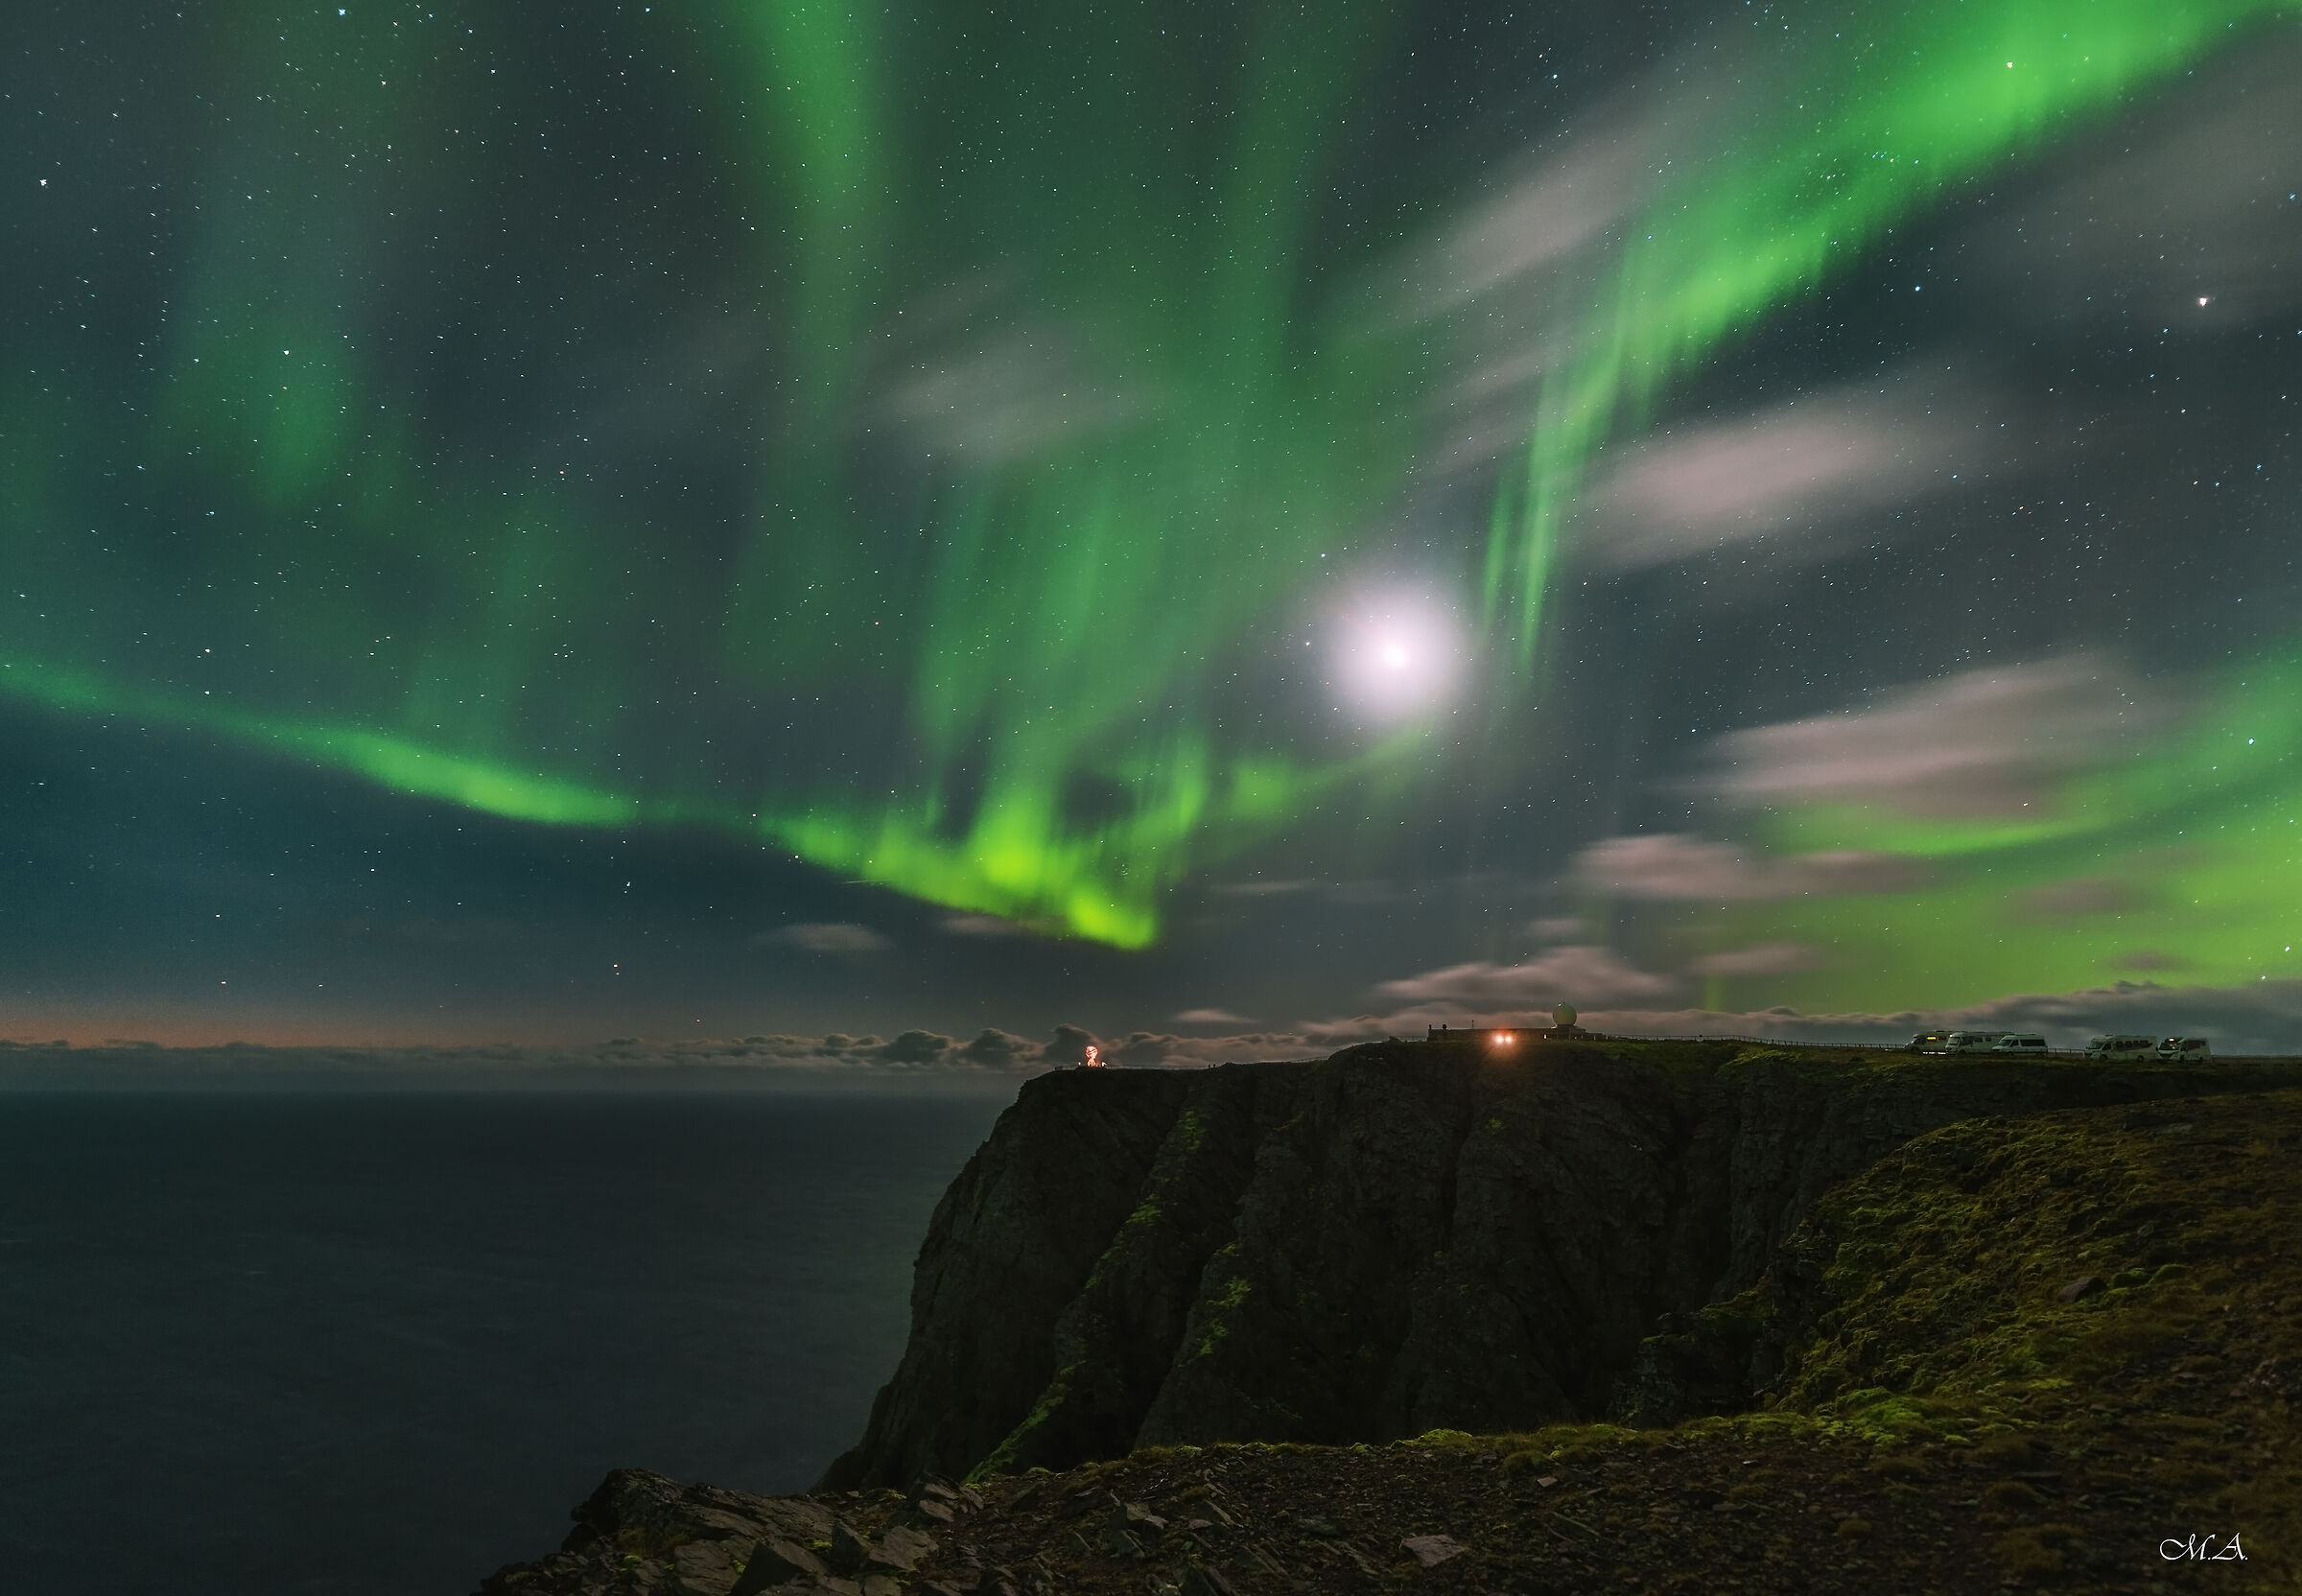 Lunar Northern Lights on the roof of Europe - North Cape...